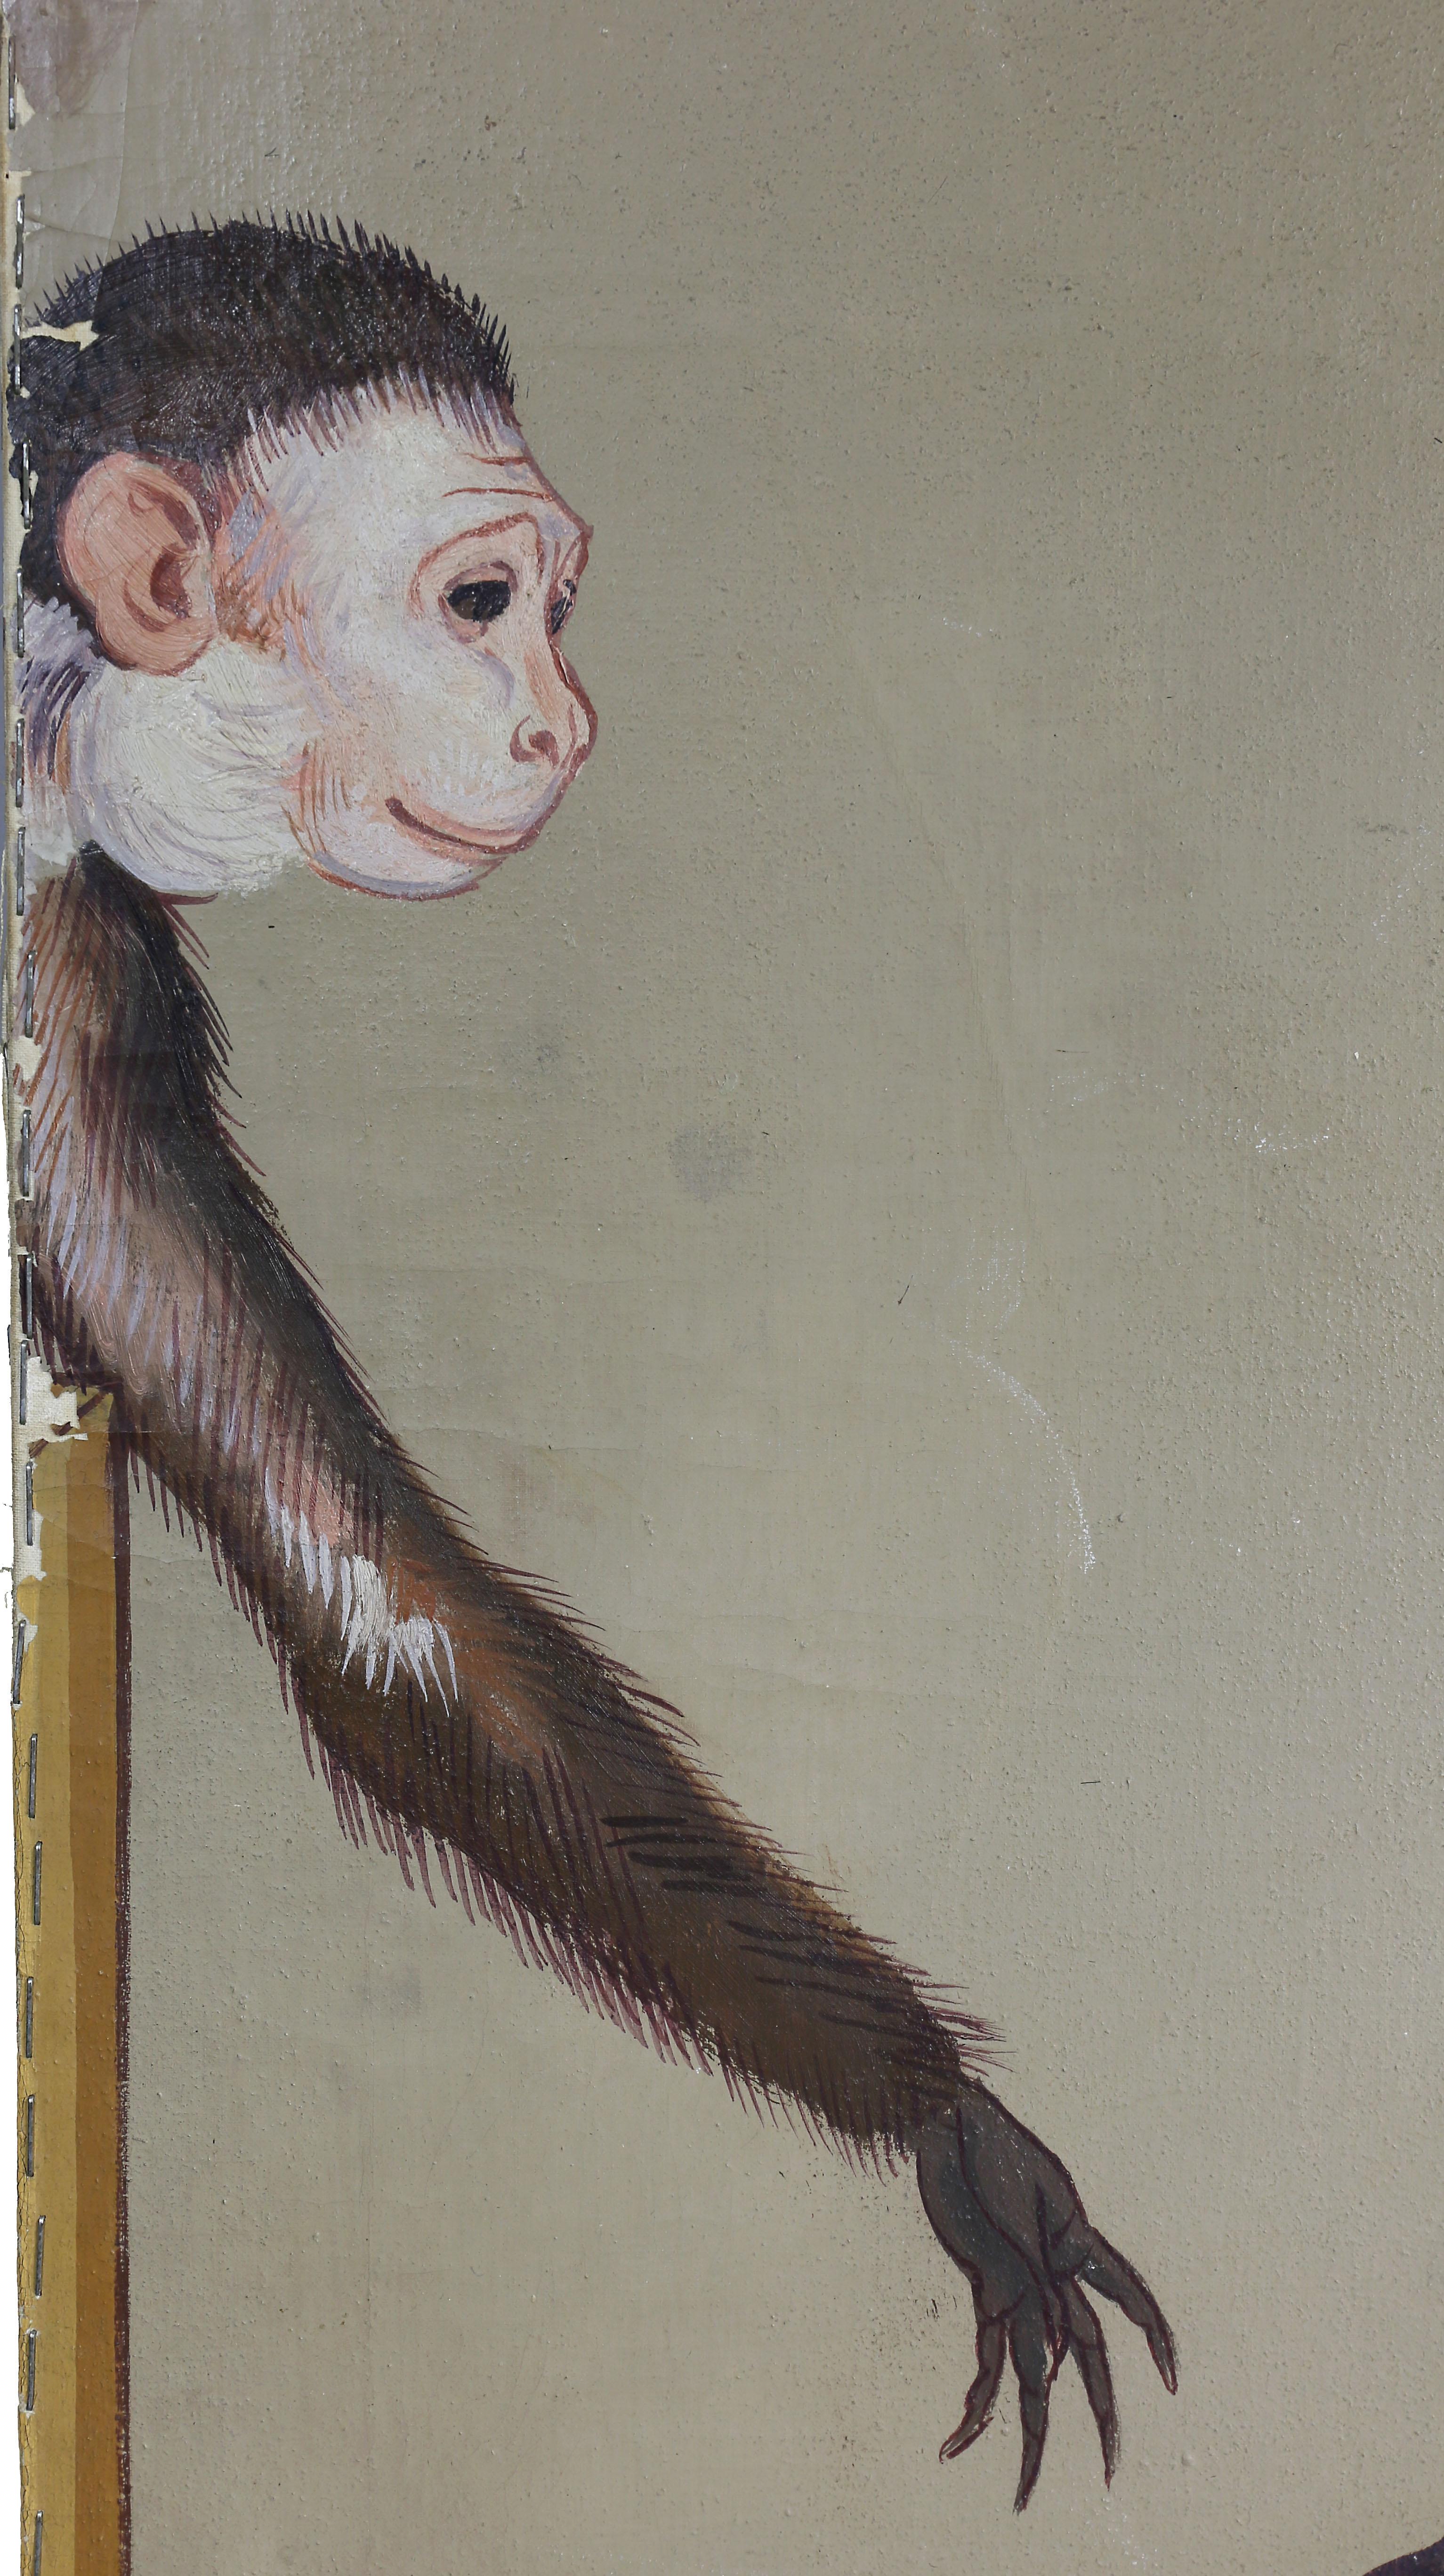 Part of something larger originally, depicting monkeys in Prunus trees. Collection William Hodgins.